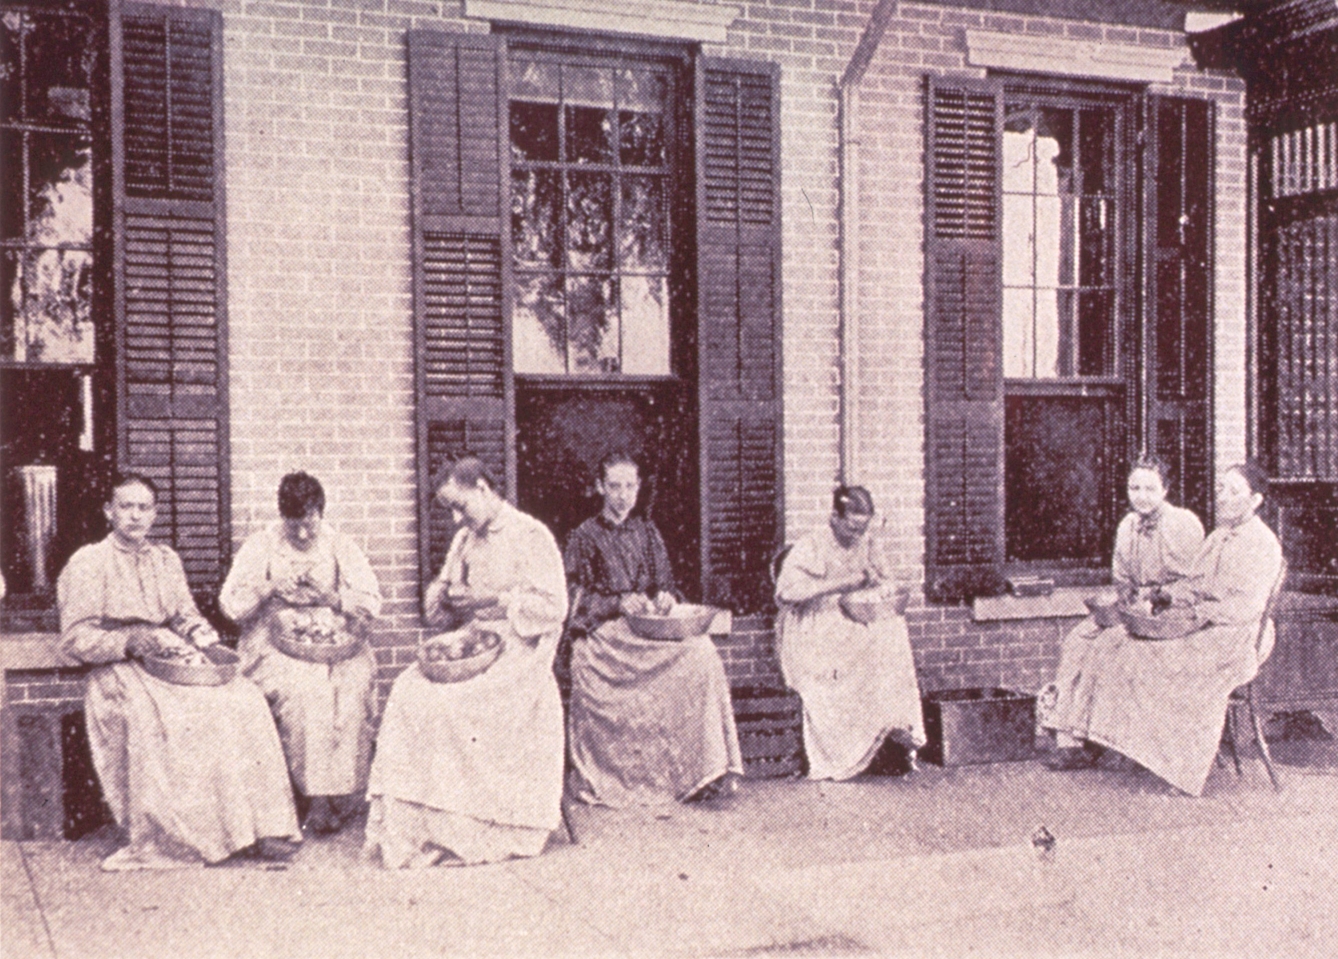 A group of women seated outside a large building, peeling vegetables into bowls on their laps